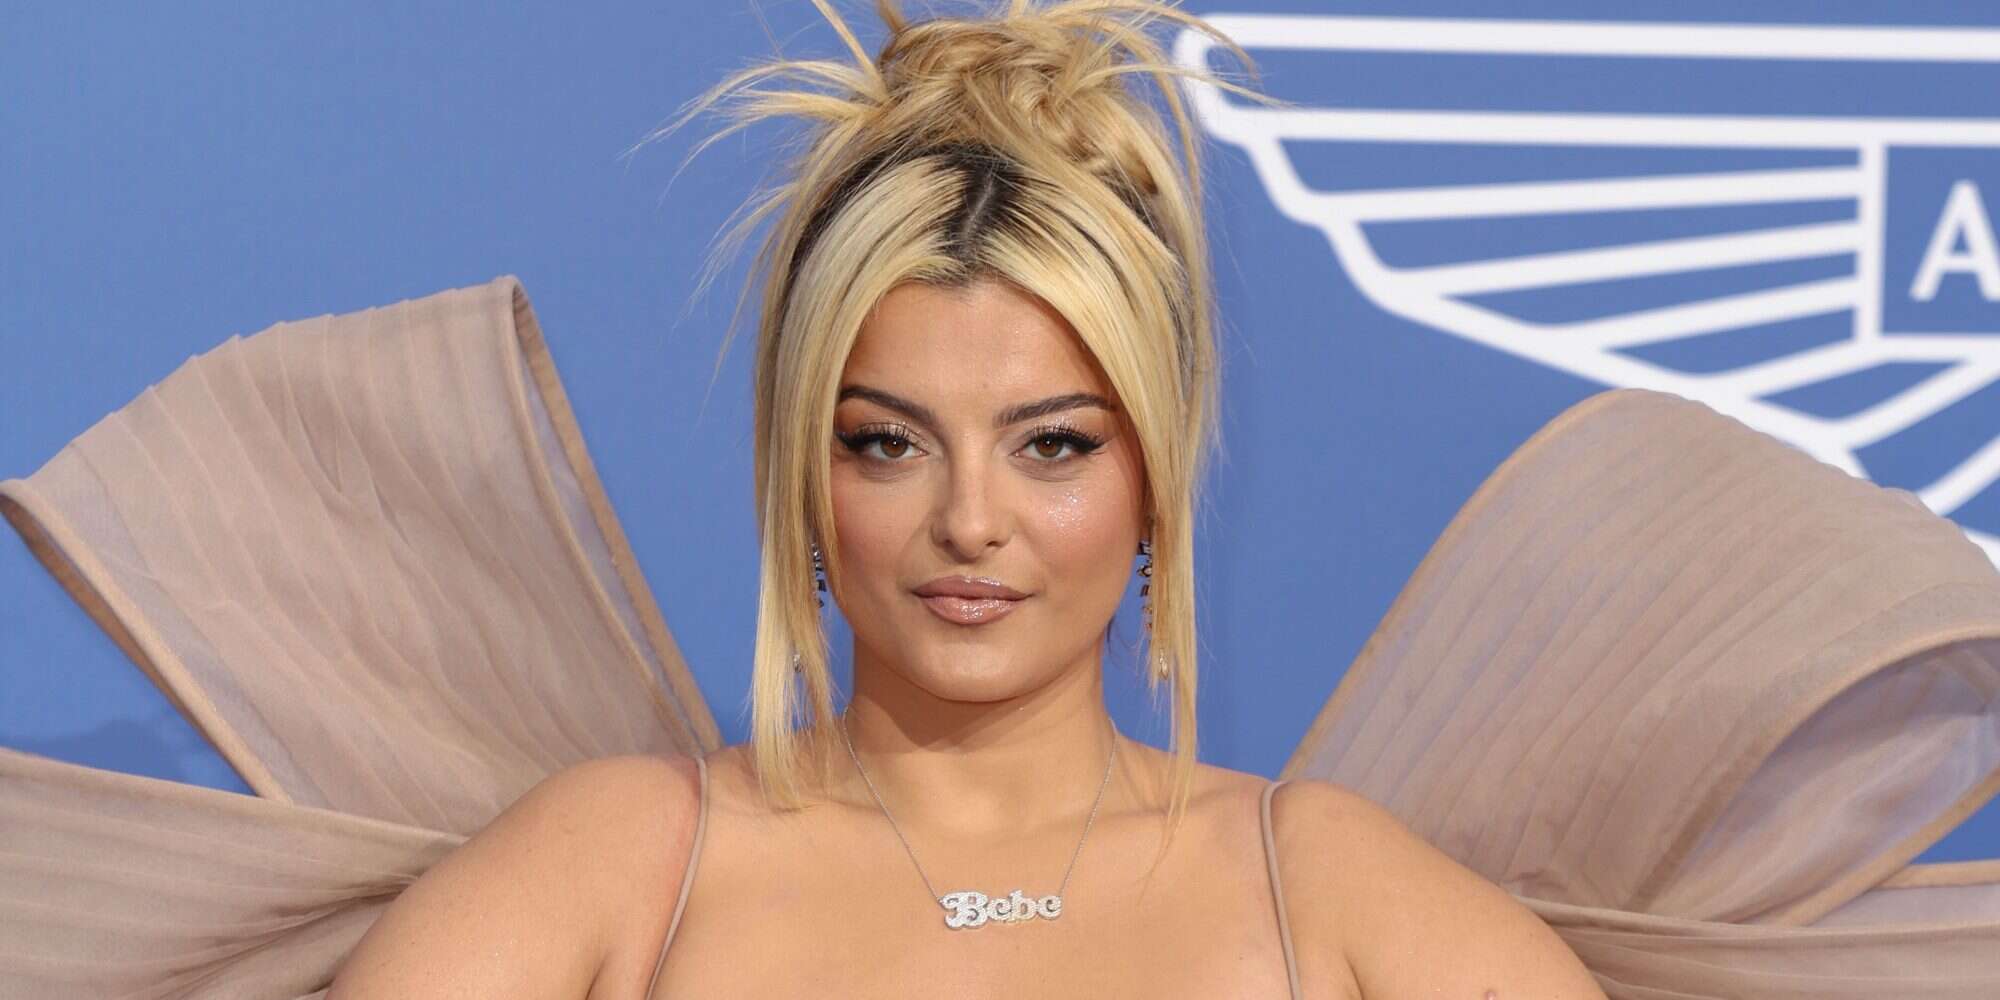 Bebe Rexha hit by cellphone during concert, suspect arrested - Read the shocking details! 30